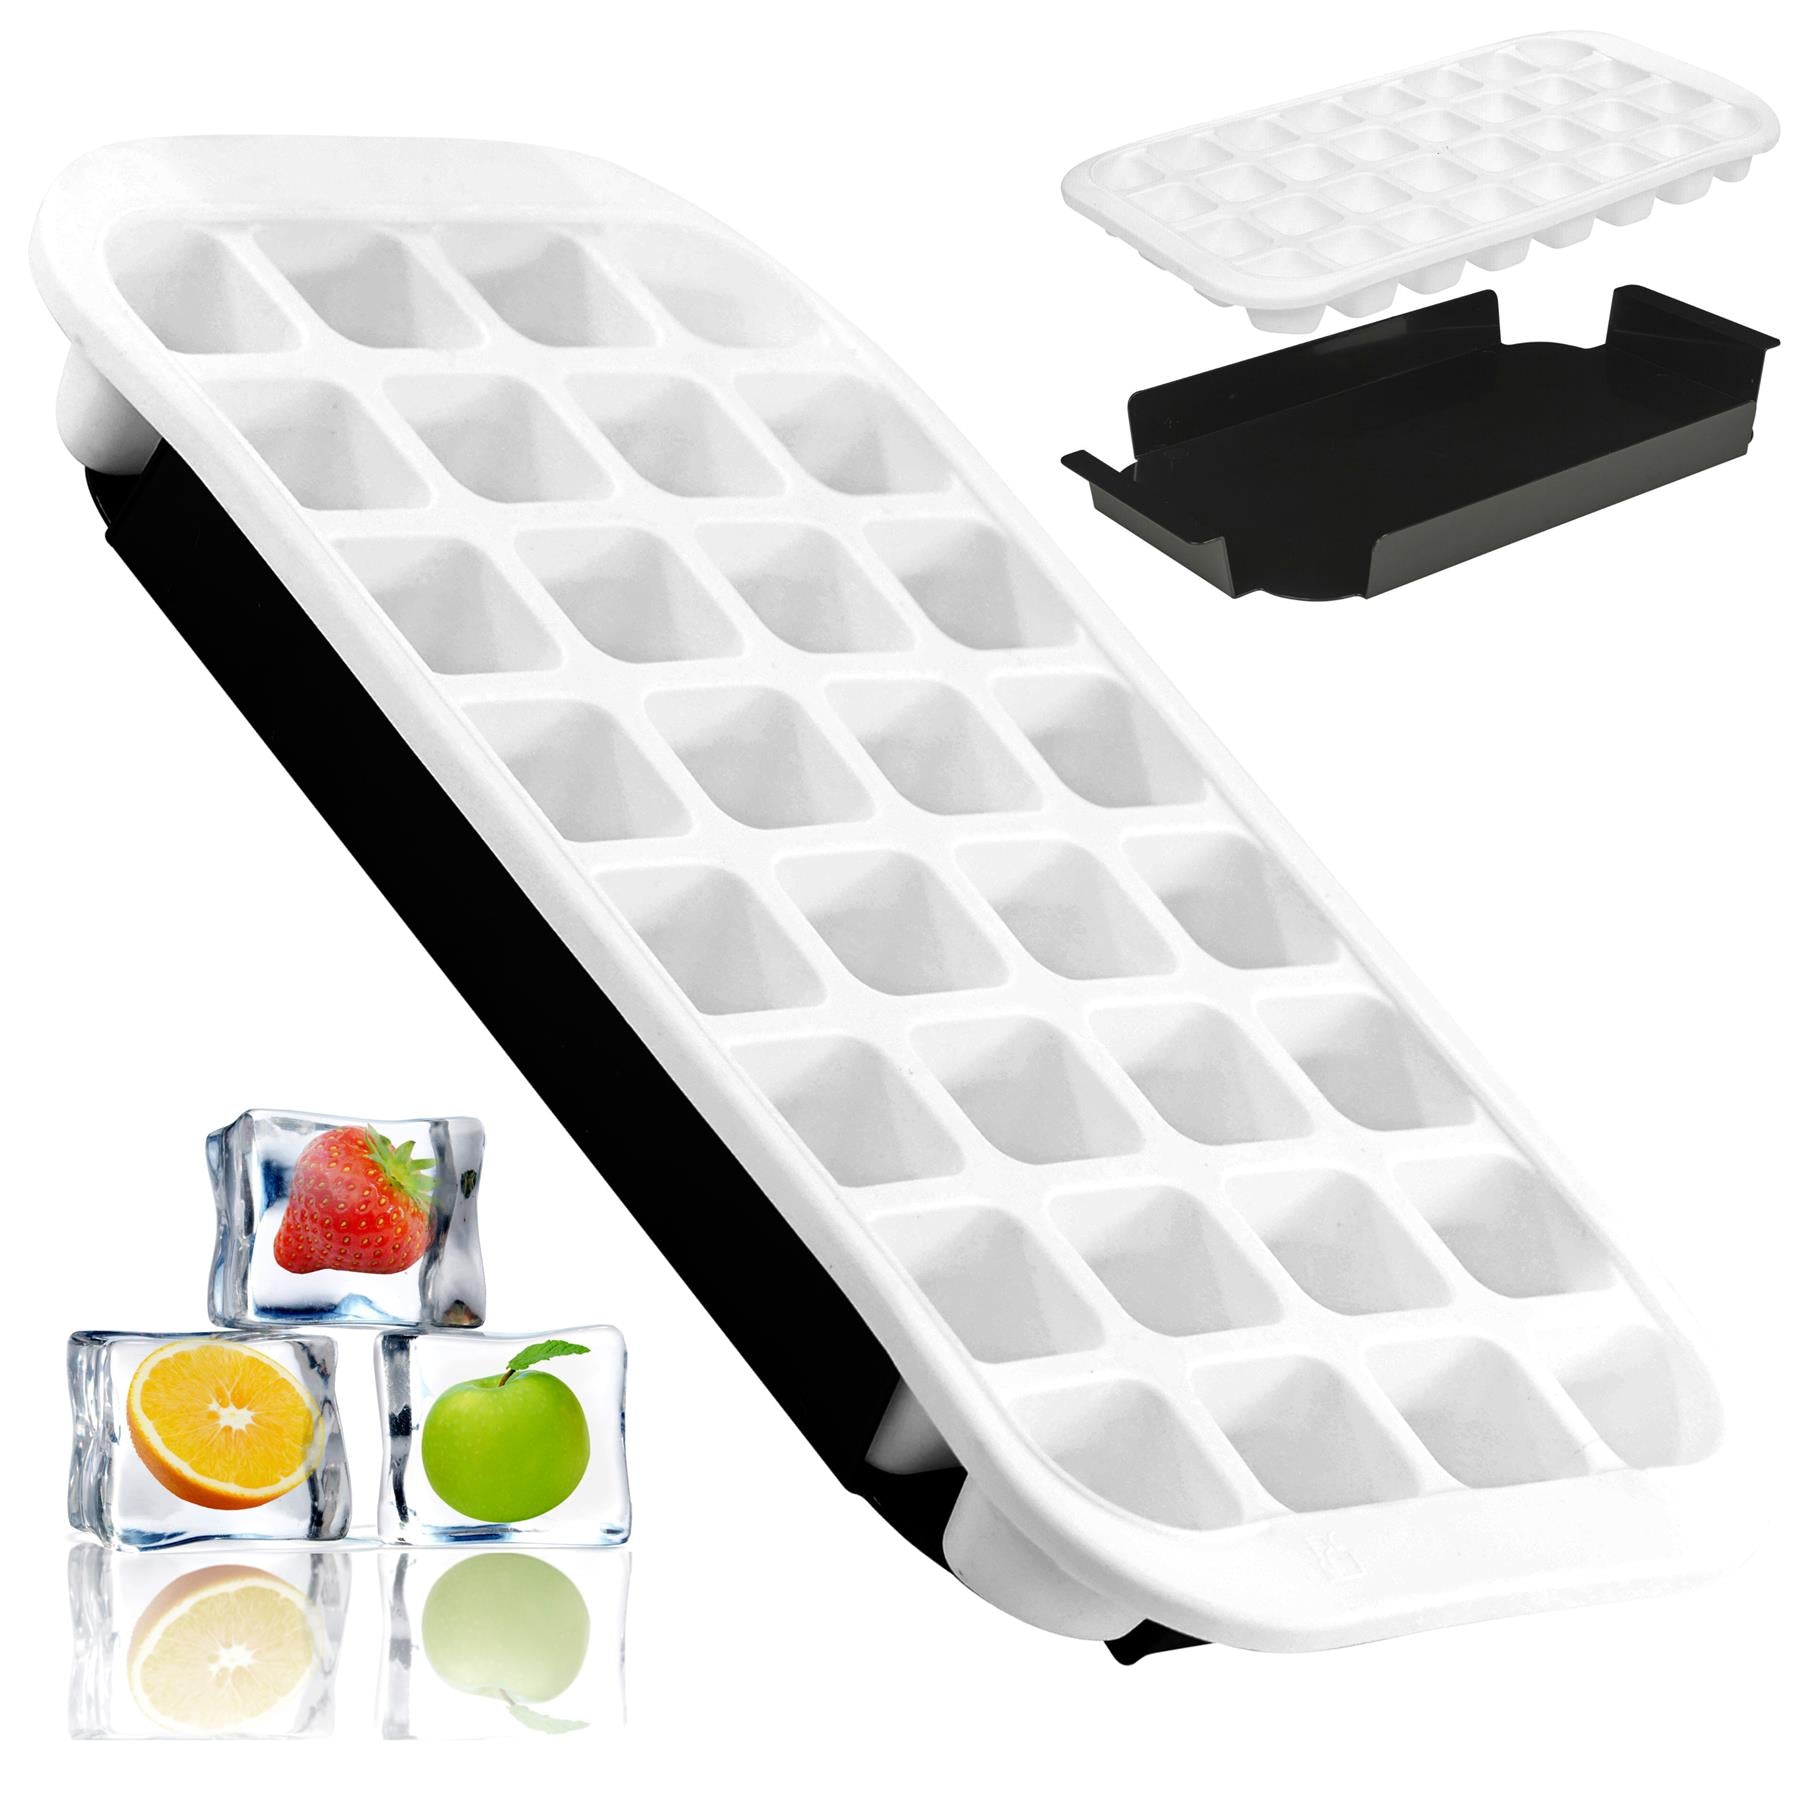 Silicone 32 Ice Cube Mould with Tray by GEEZY - UKBuyZone